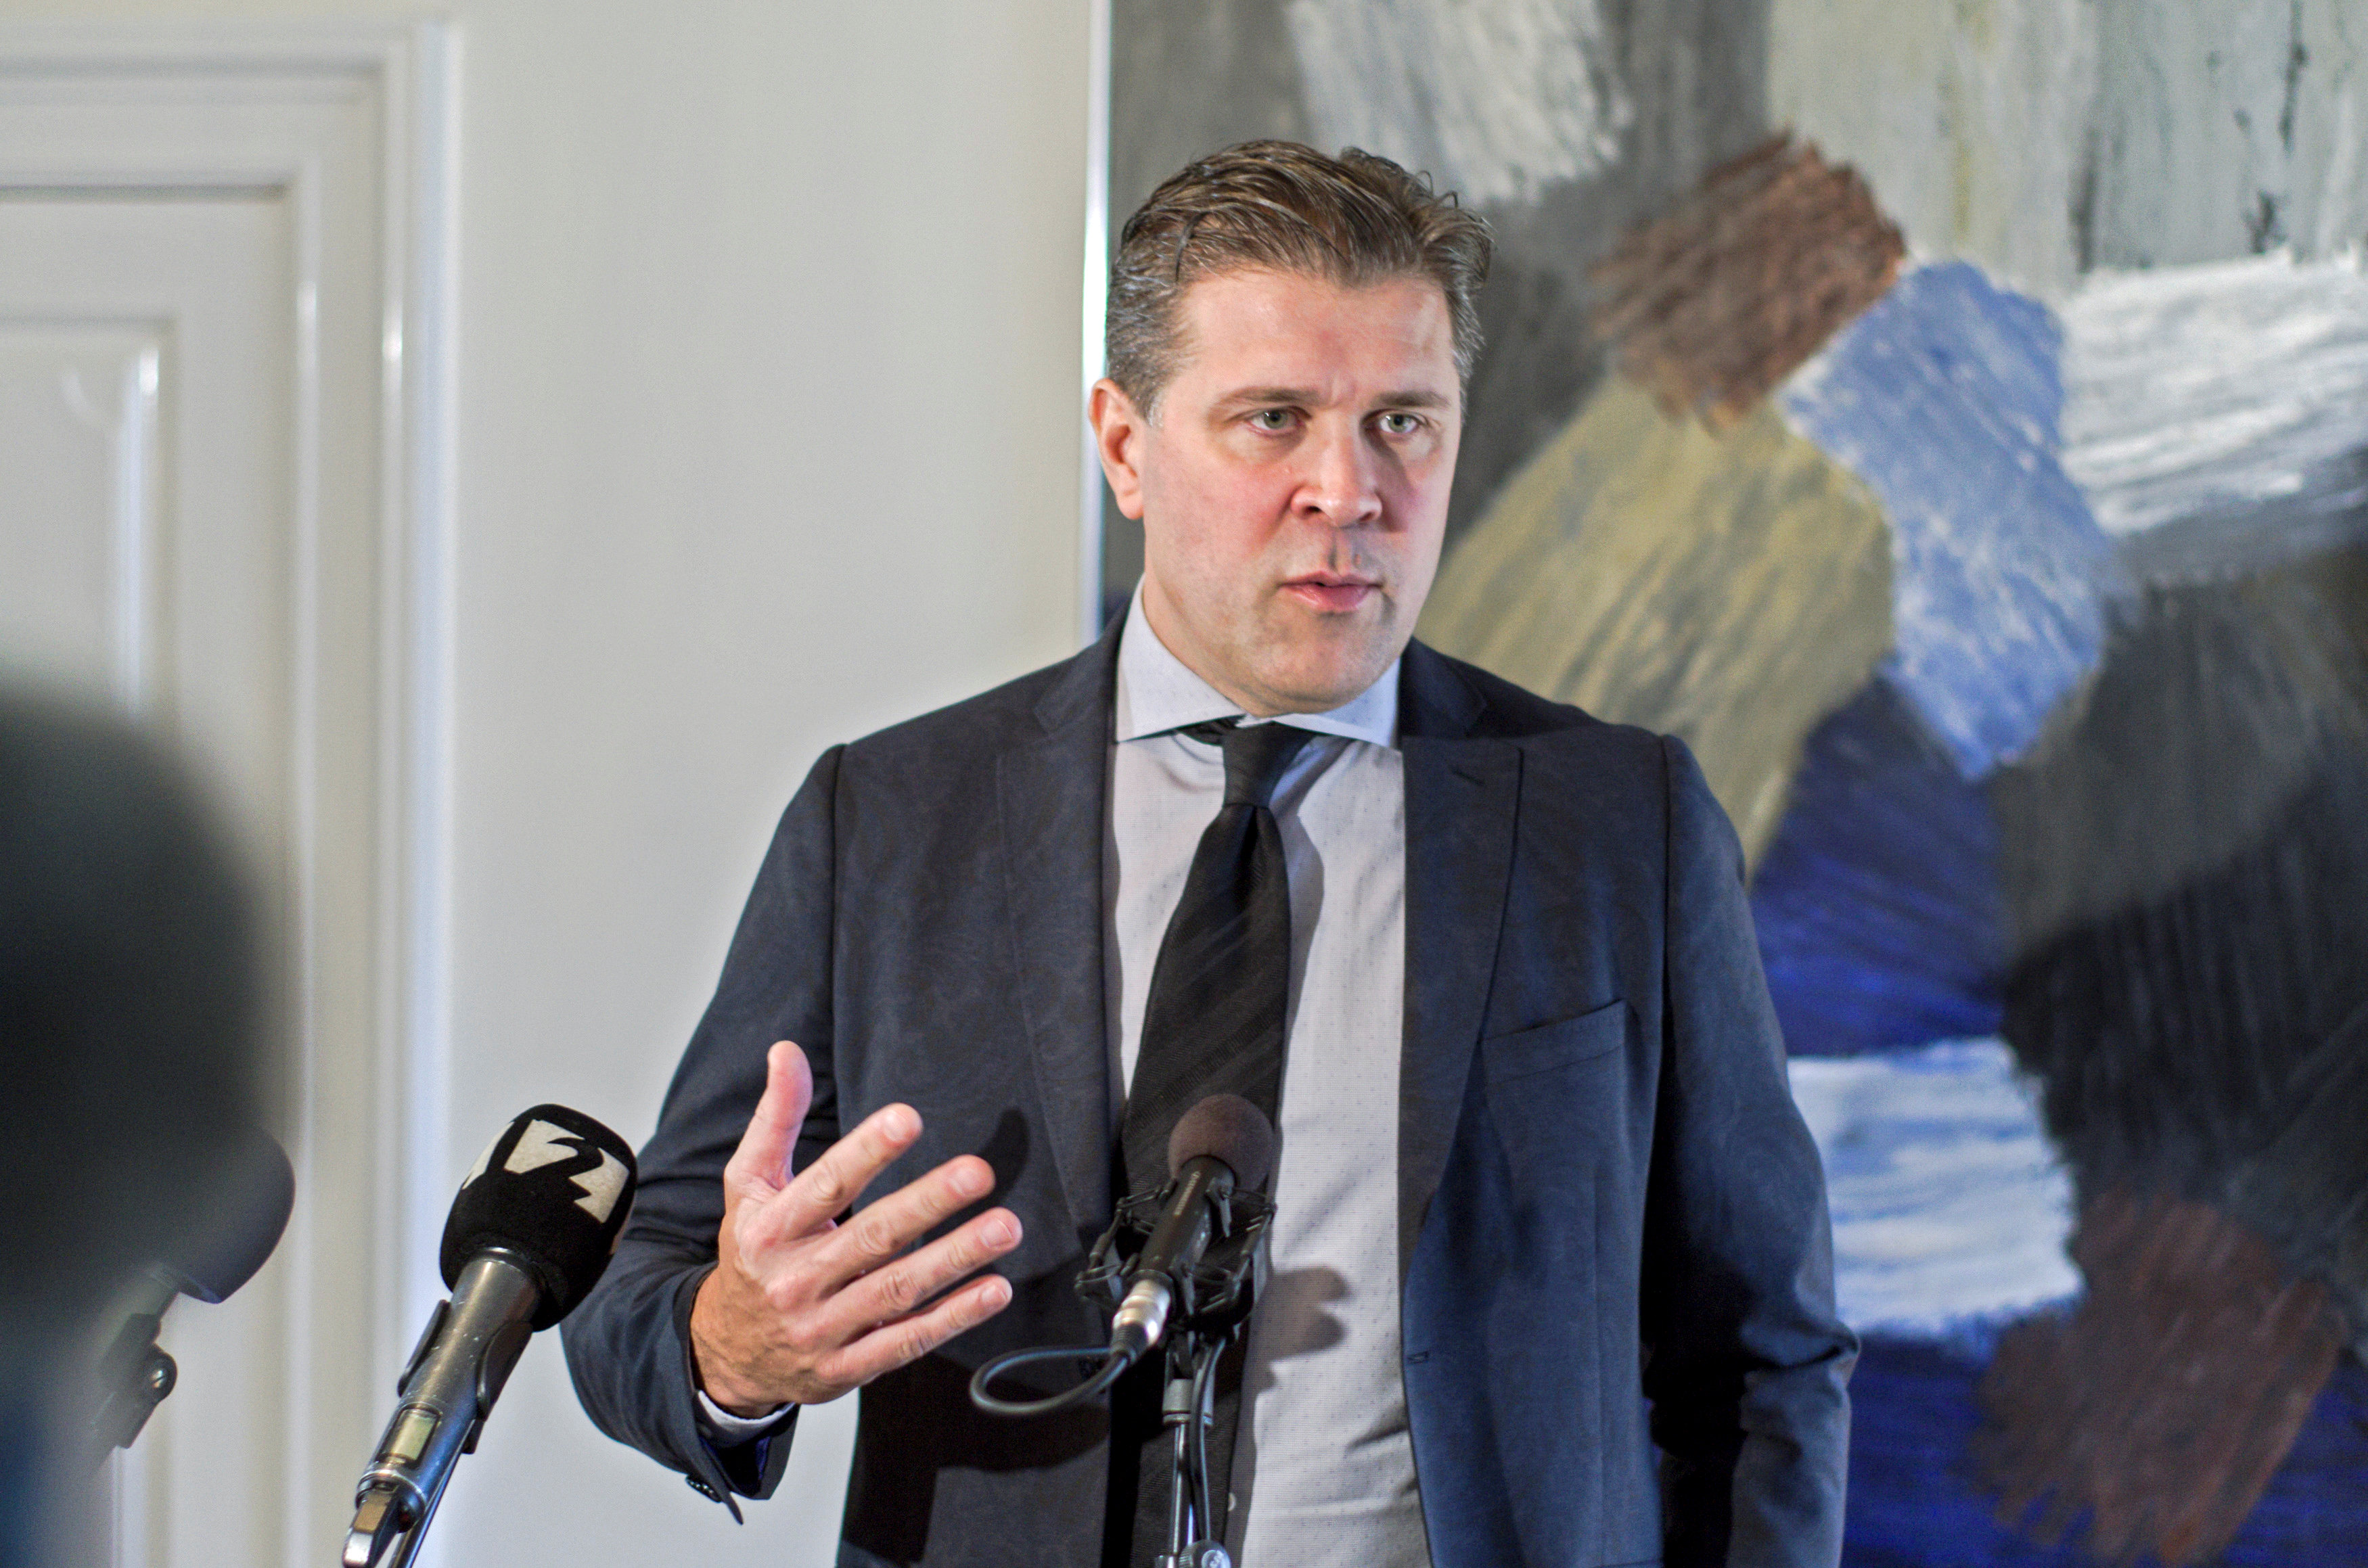 Iceland’s center-right parties agree to form government; EU vote eyed